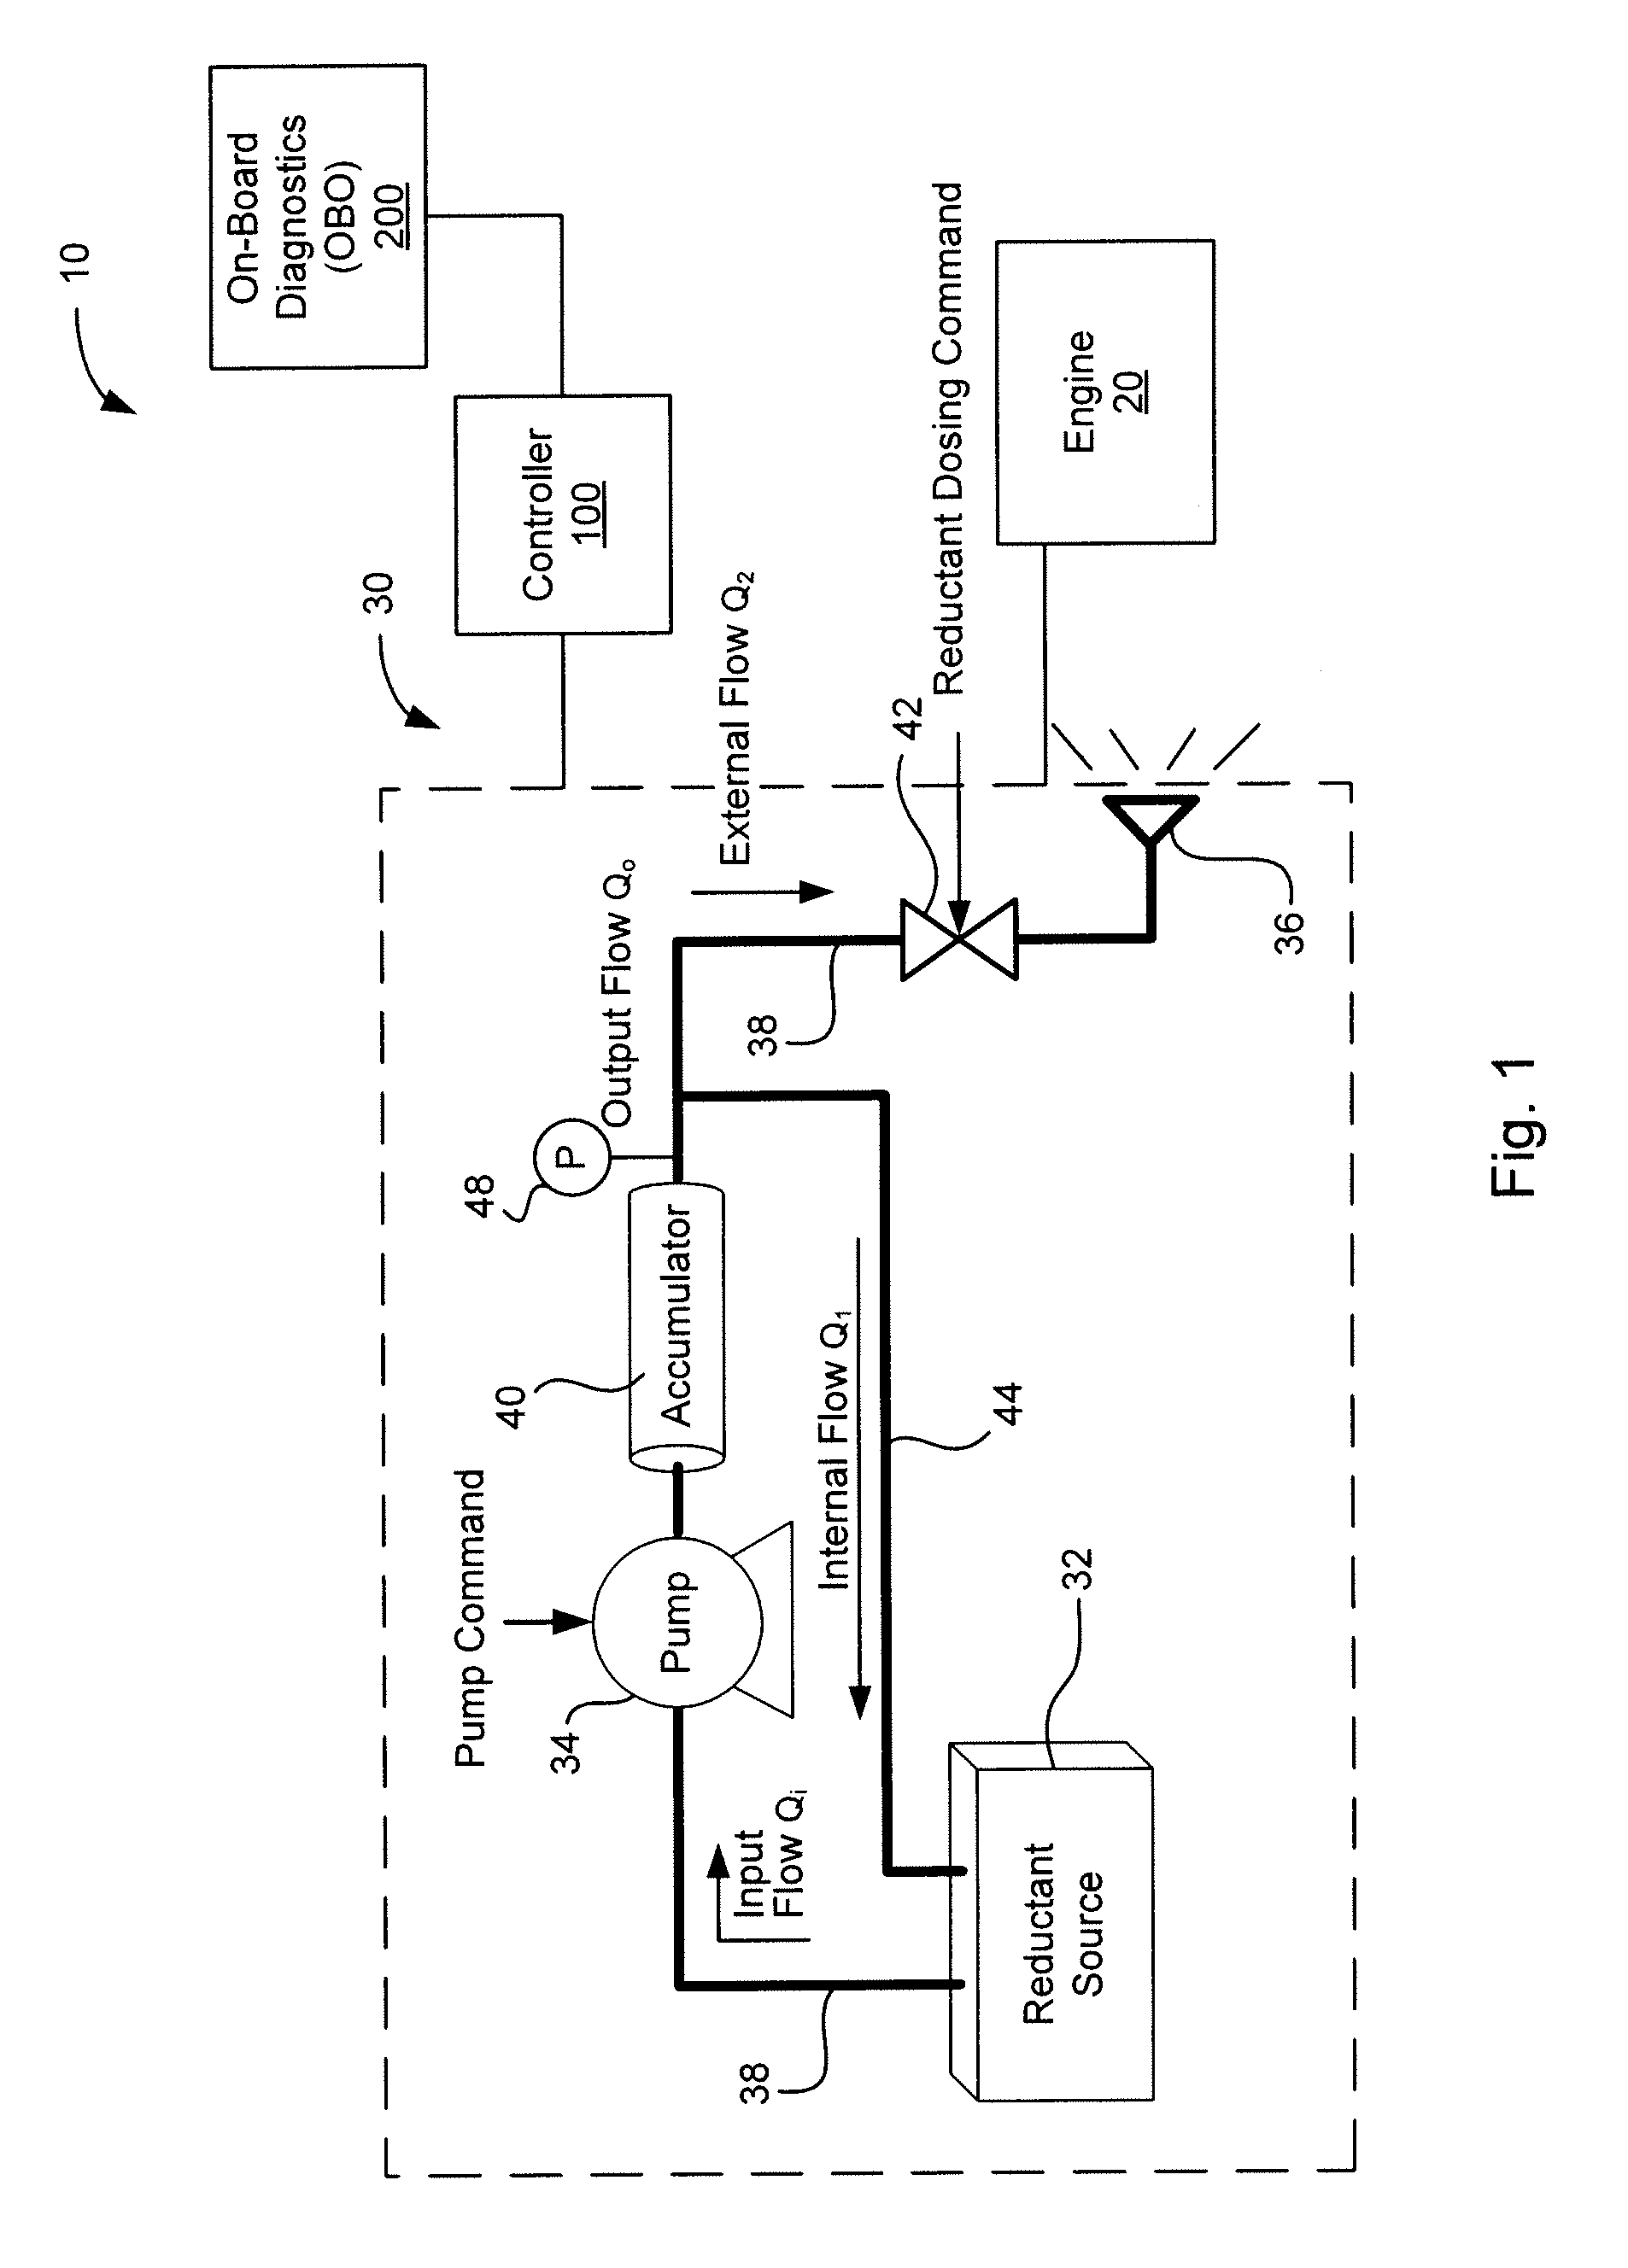 Apparatus, method, and system for diagnosing reductant delivery performance